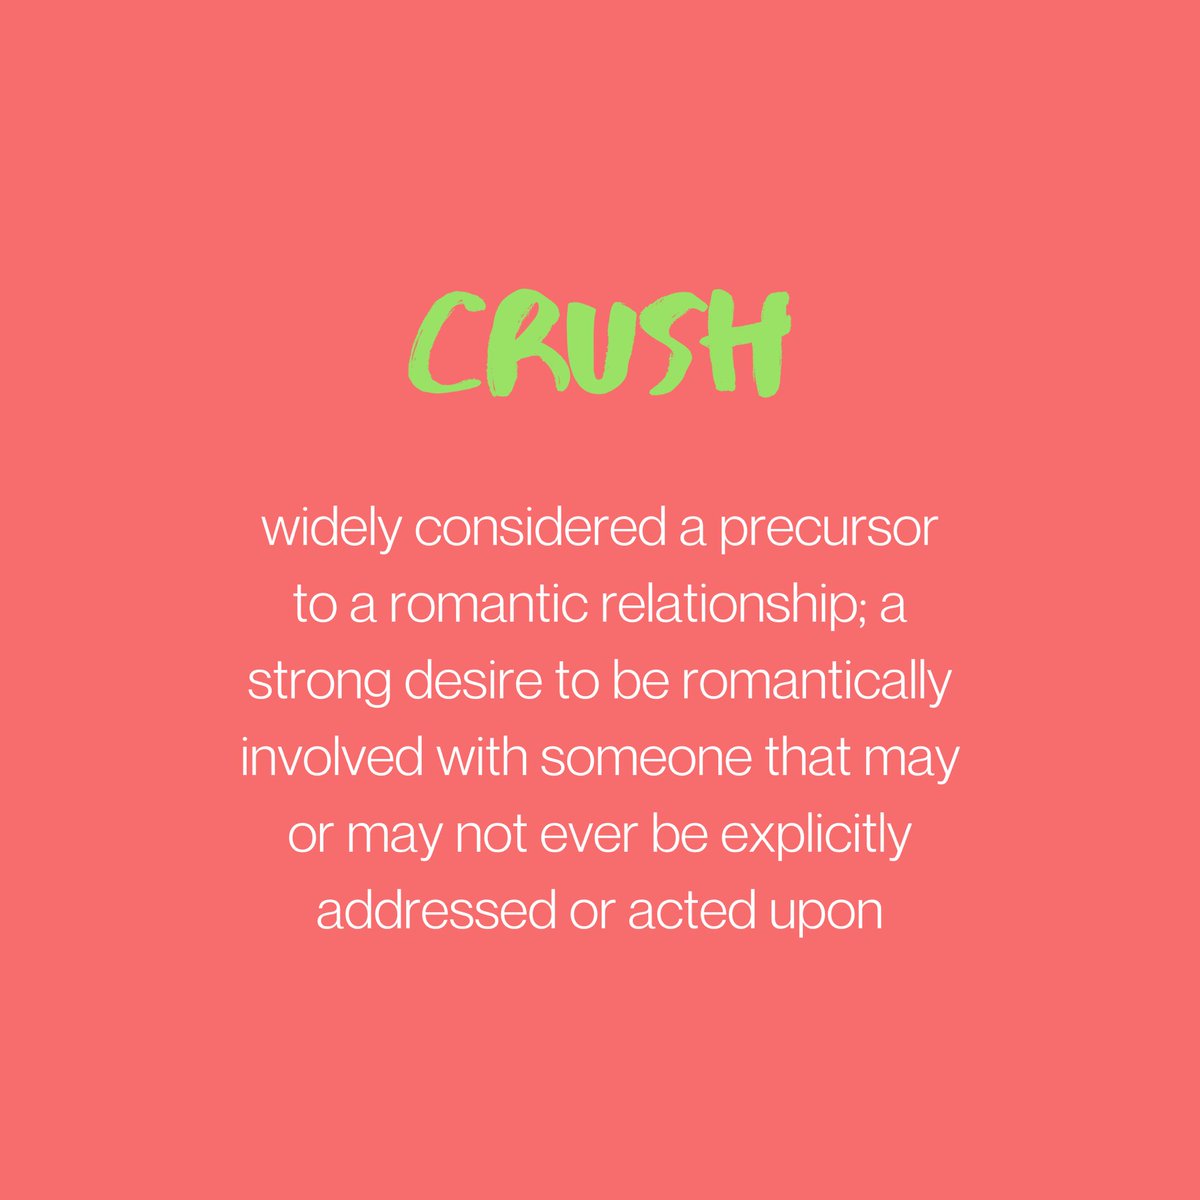 CRUSH: usually considered a precursor to a romantic relationship; a strong desire to be romantically involved with someone that may or may not ever be explicitly addressed or acted upon.